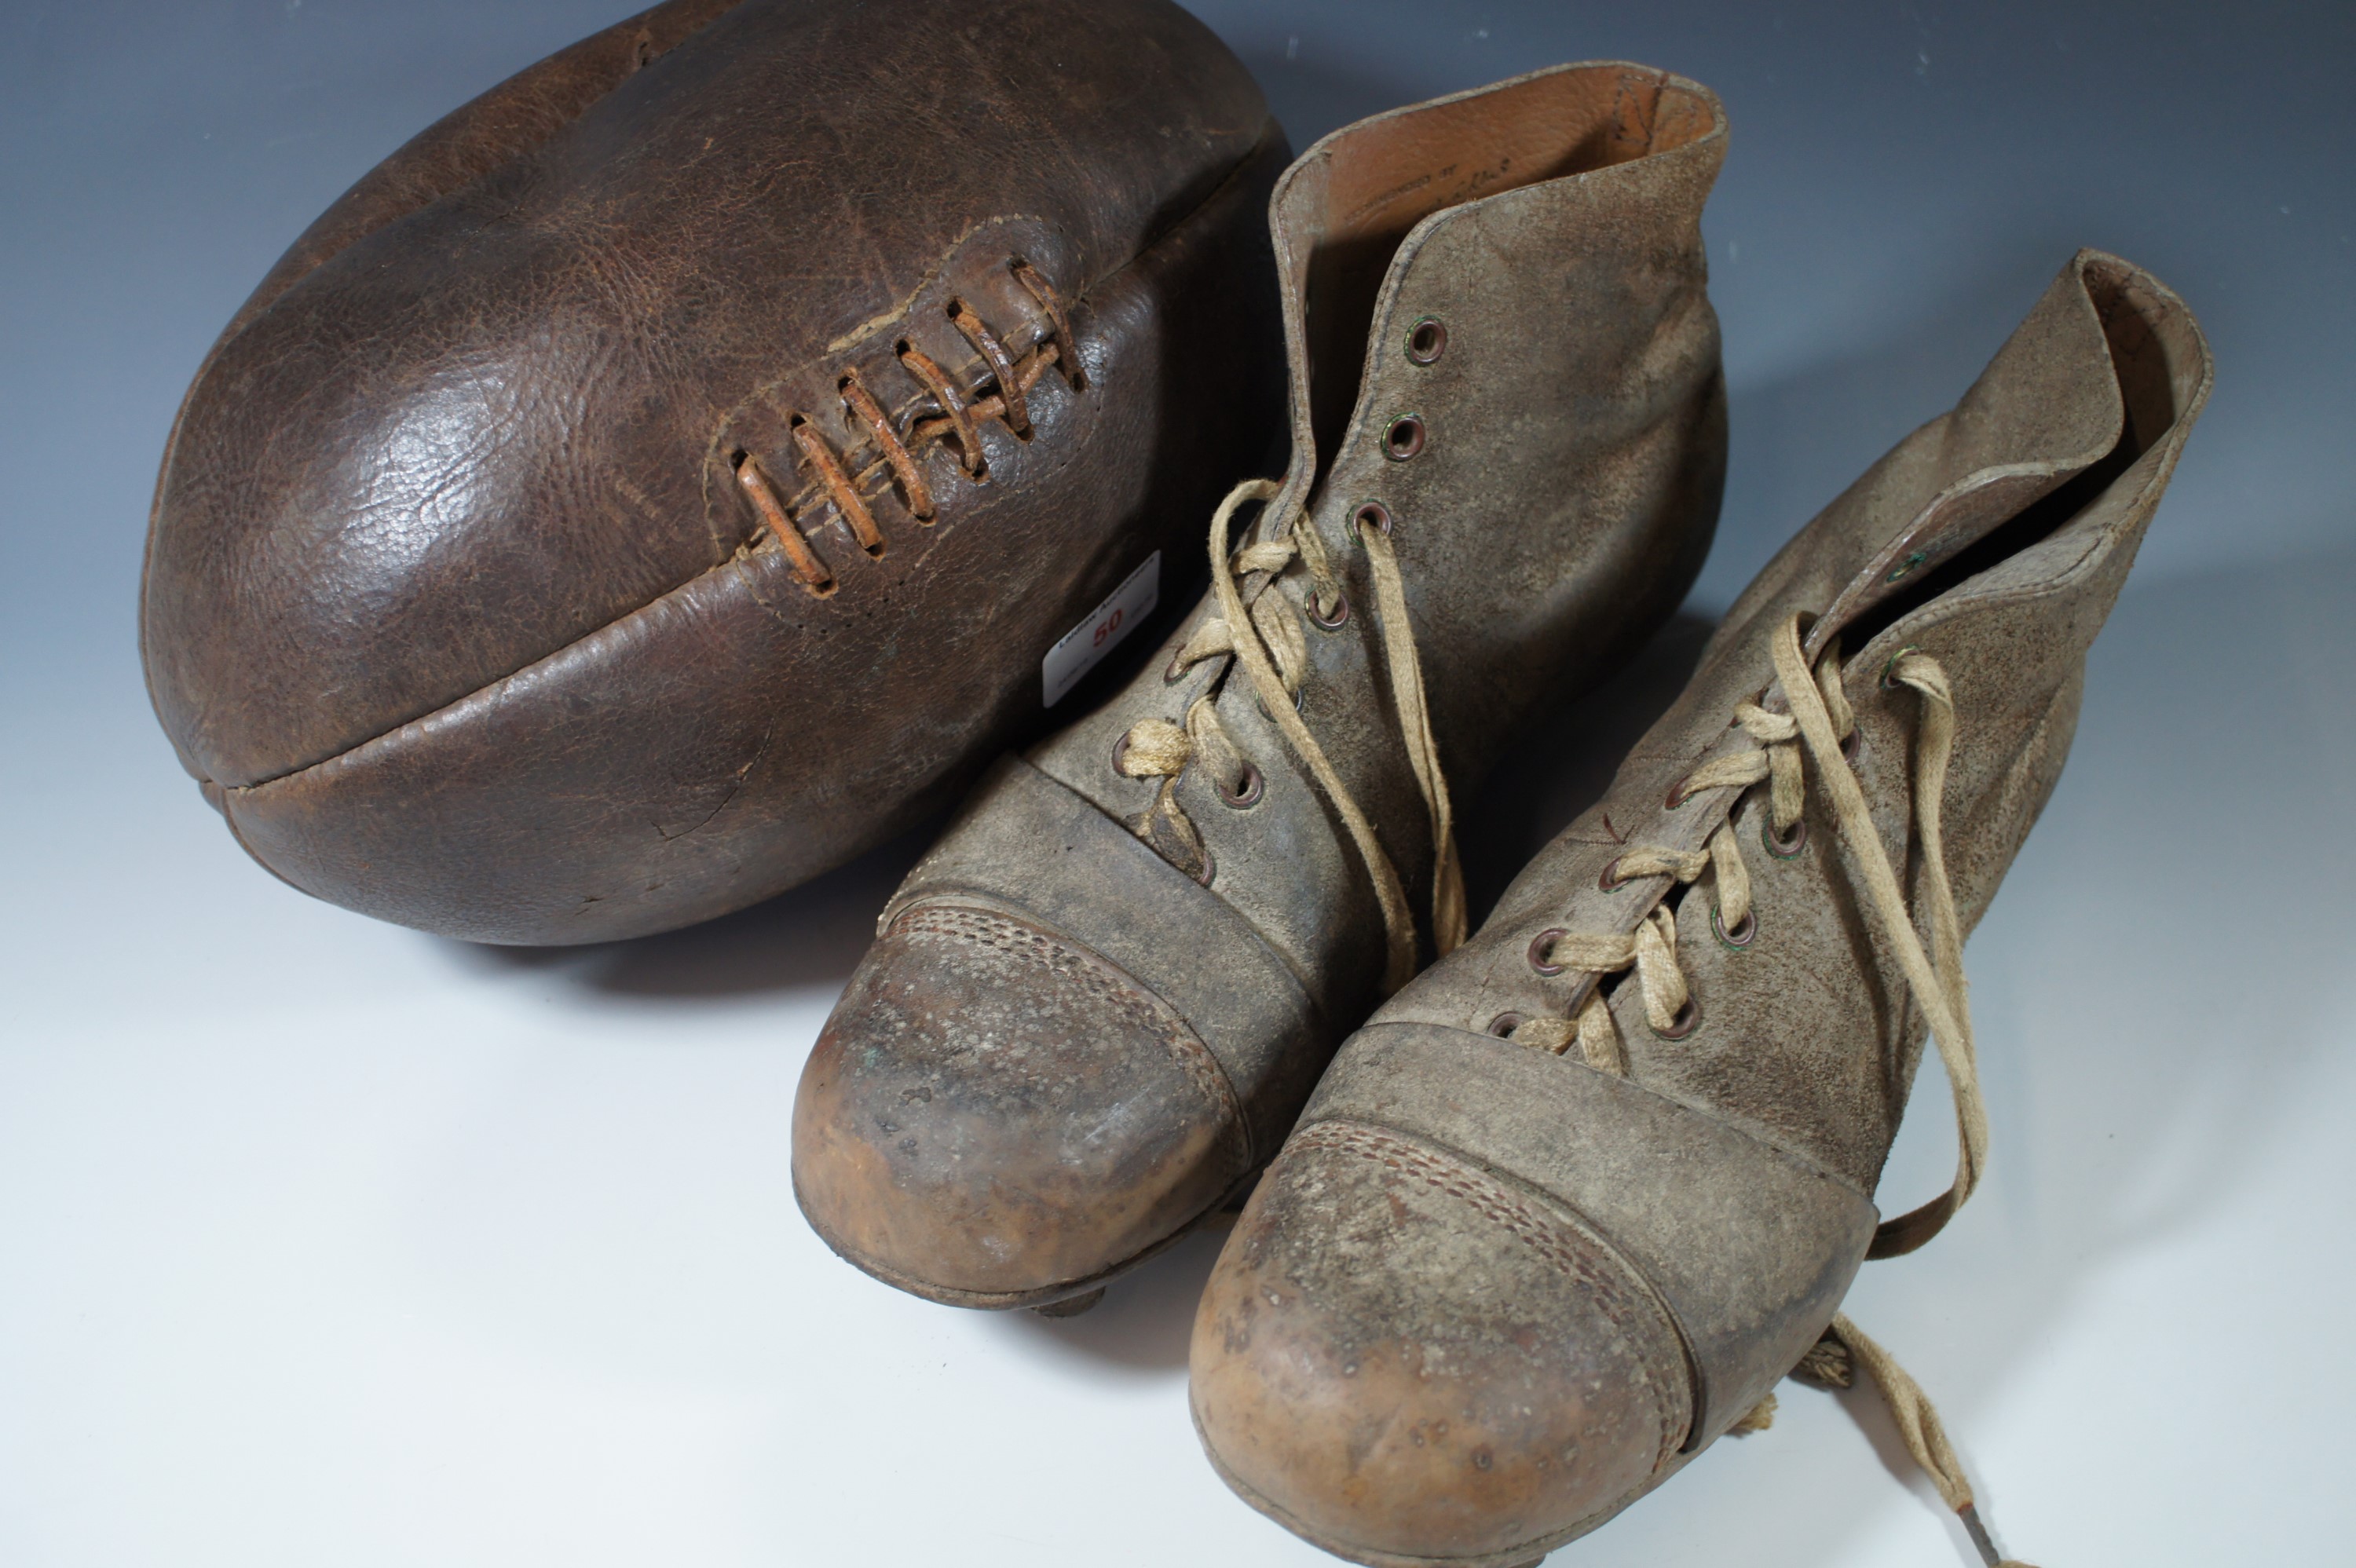 A vintage leather rugby ball and boots